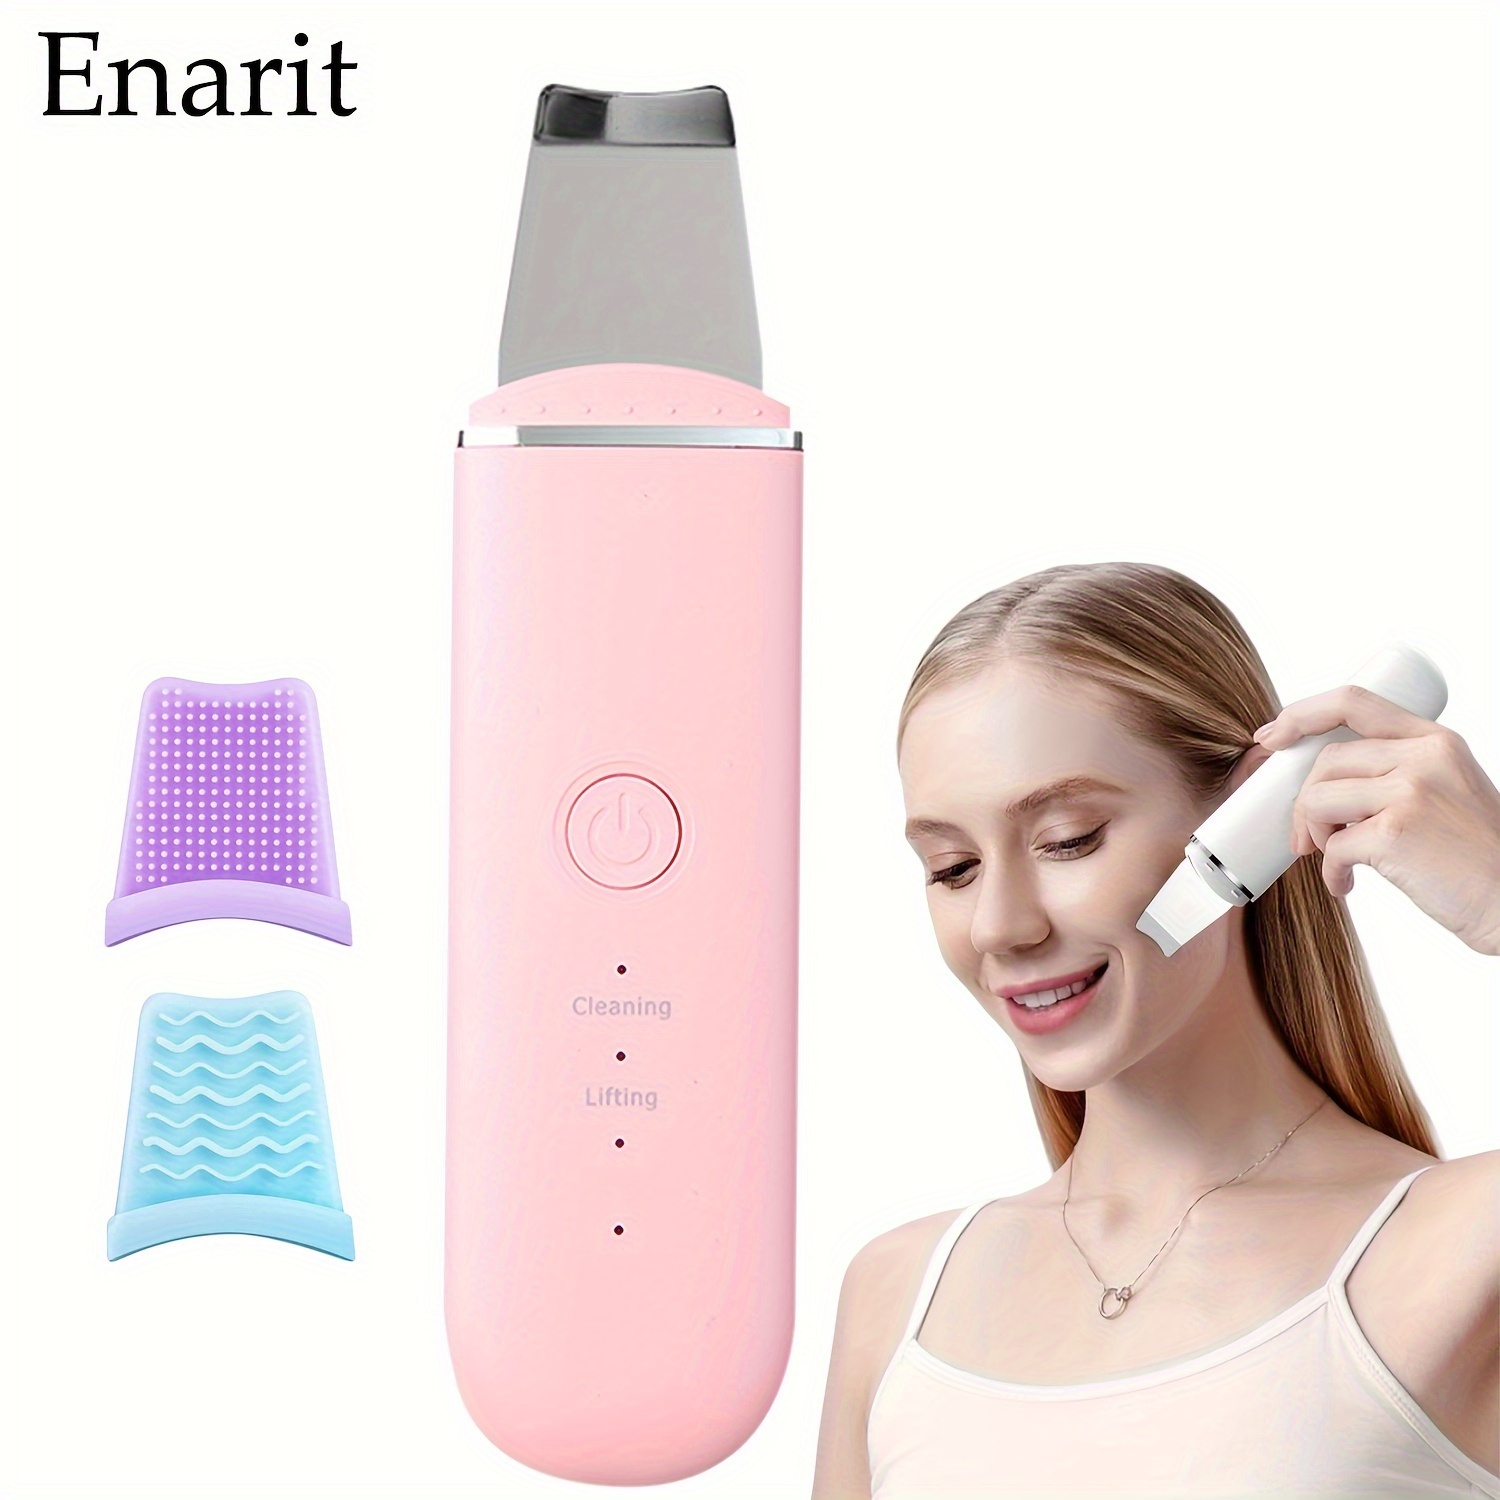 

Enarit Electric Facial Skin Scrubber, Facial Deep Cleansing Tool, Rechargeable Cleansing Scrubber, Facial Cleansing Massage Skin Care Beauty Meter, Gifts For Women